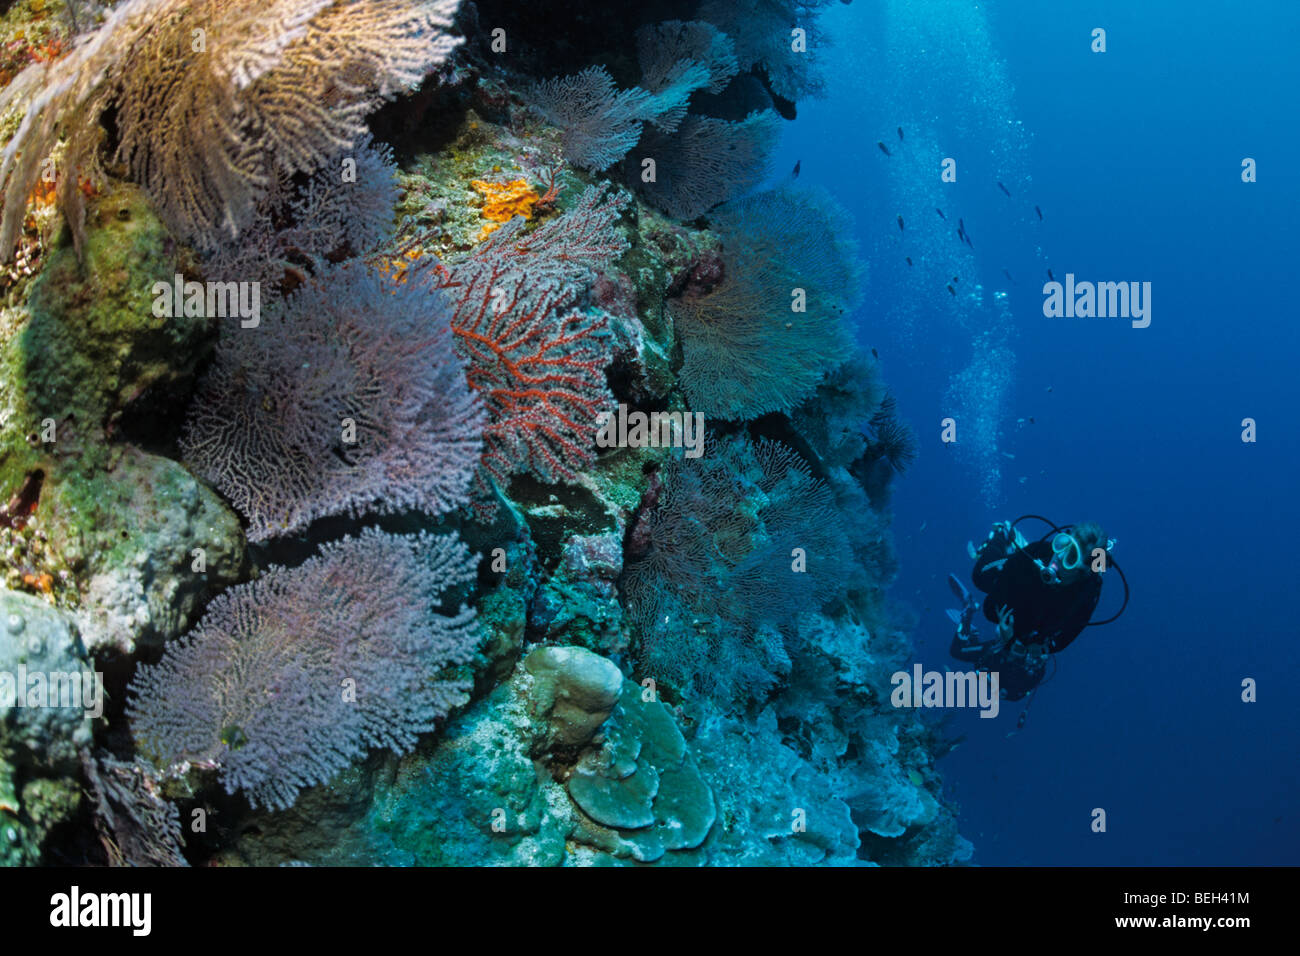 Diver and Coral Reef, Christmas Island, Australia Stock Photo